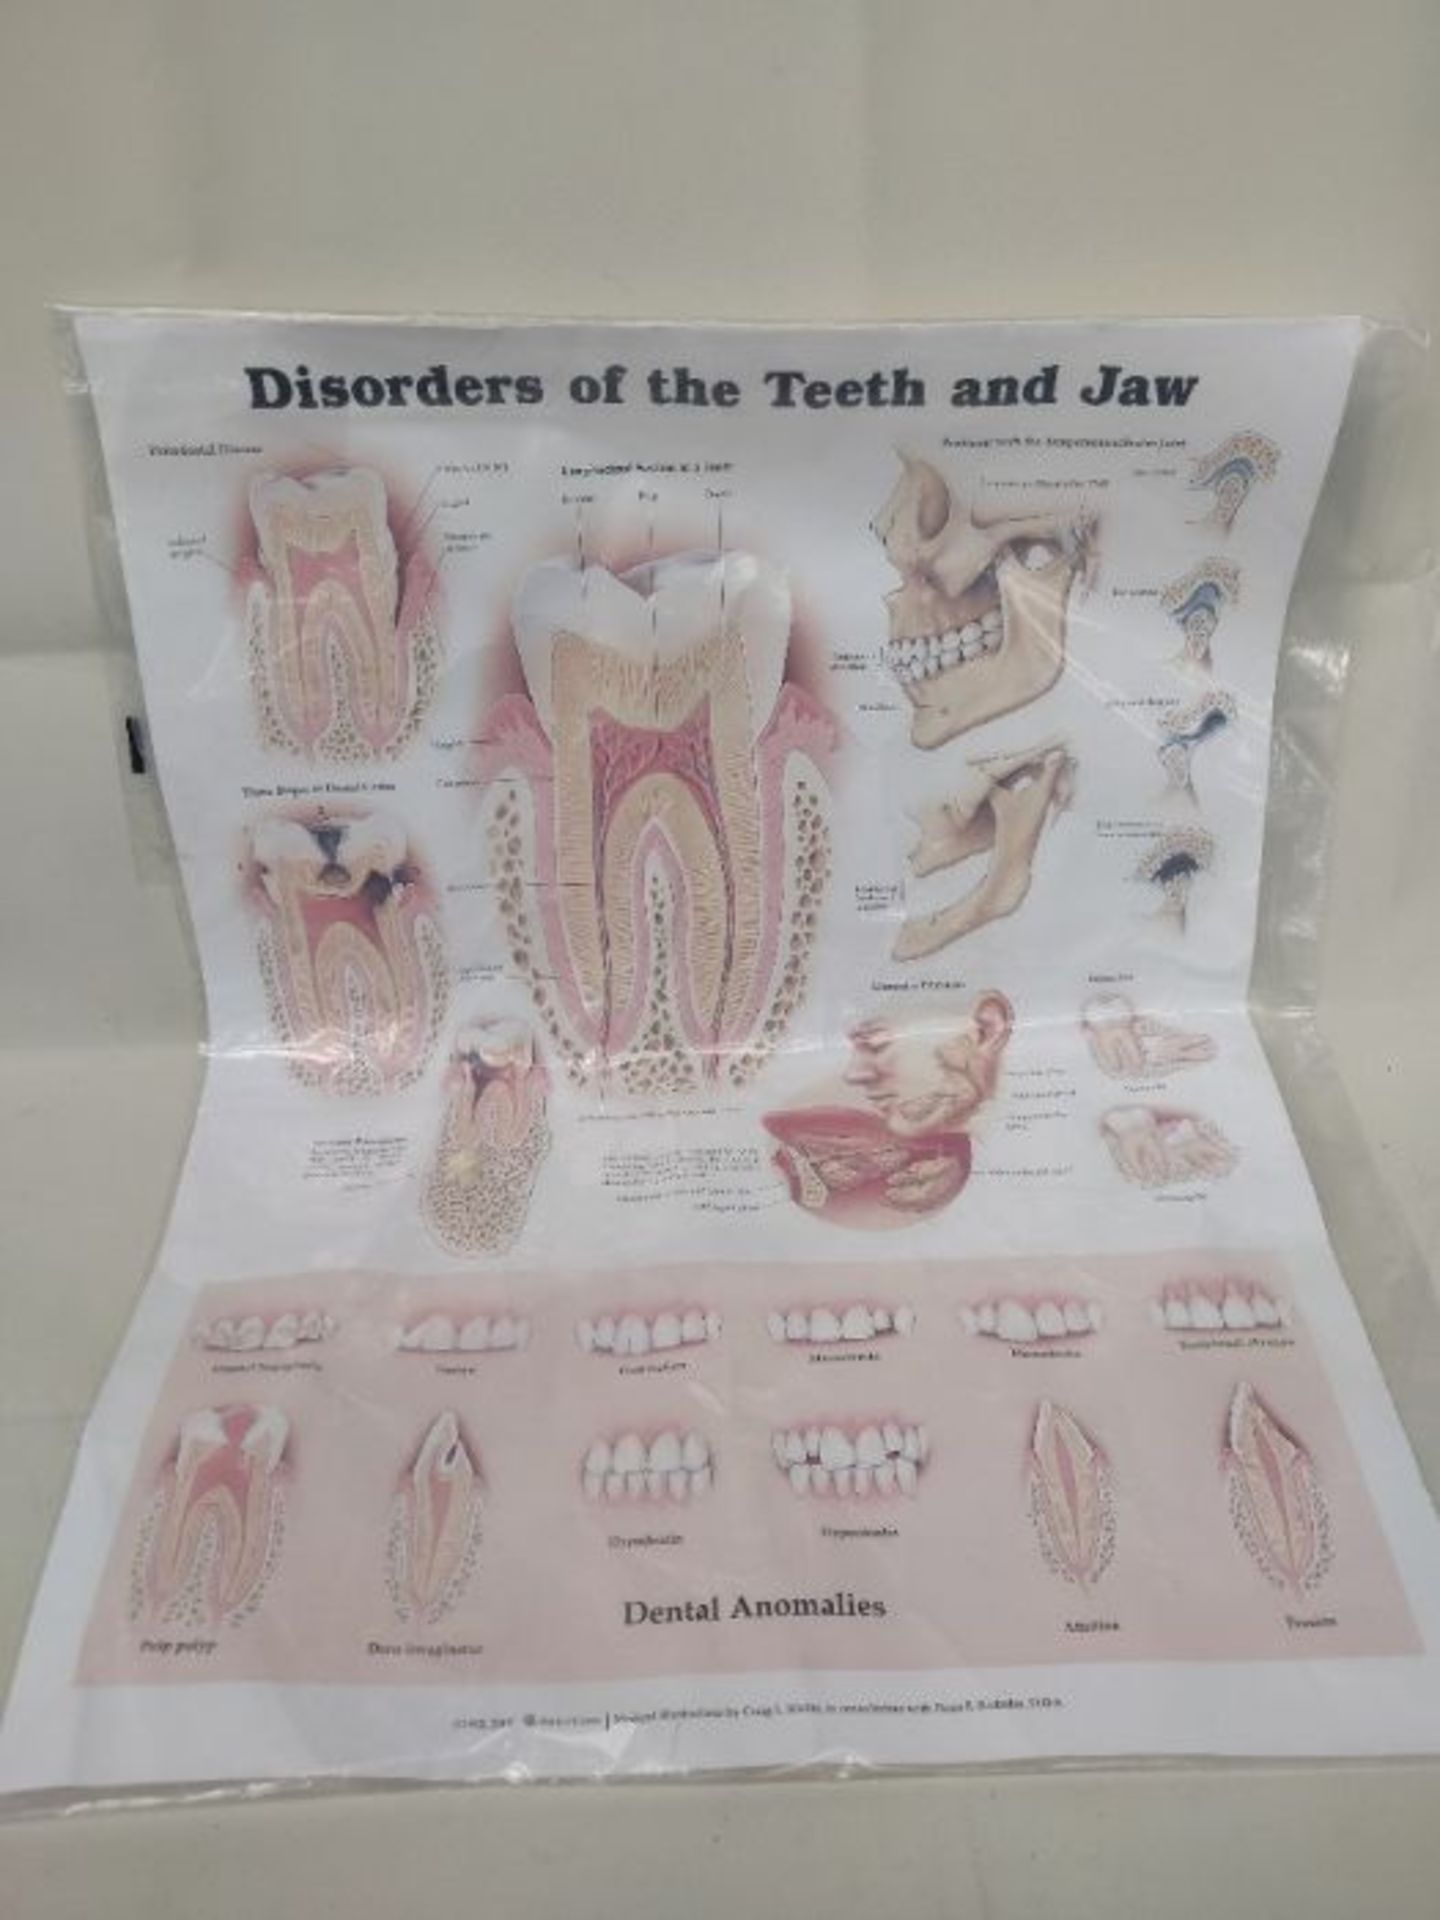 Disorders of the Teeth and Jaw - Image 2 of 2